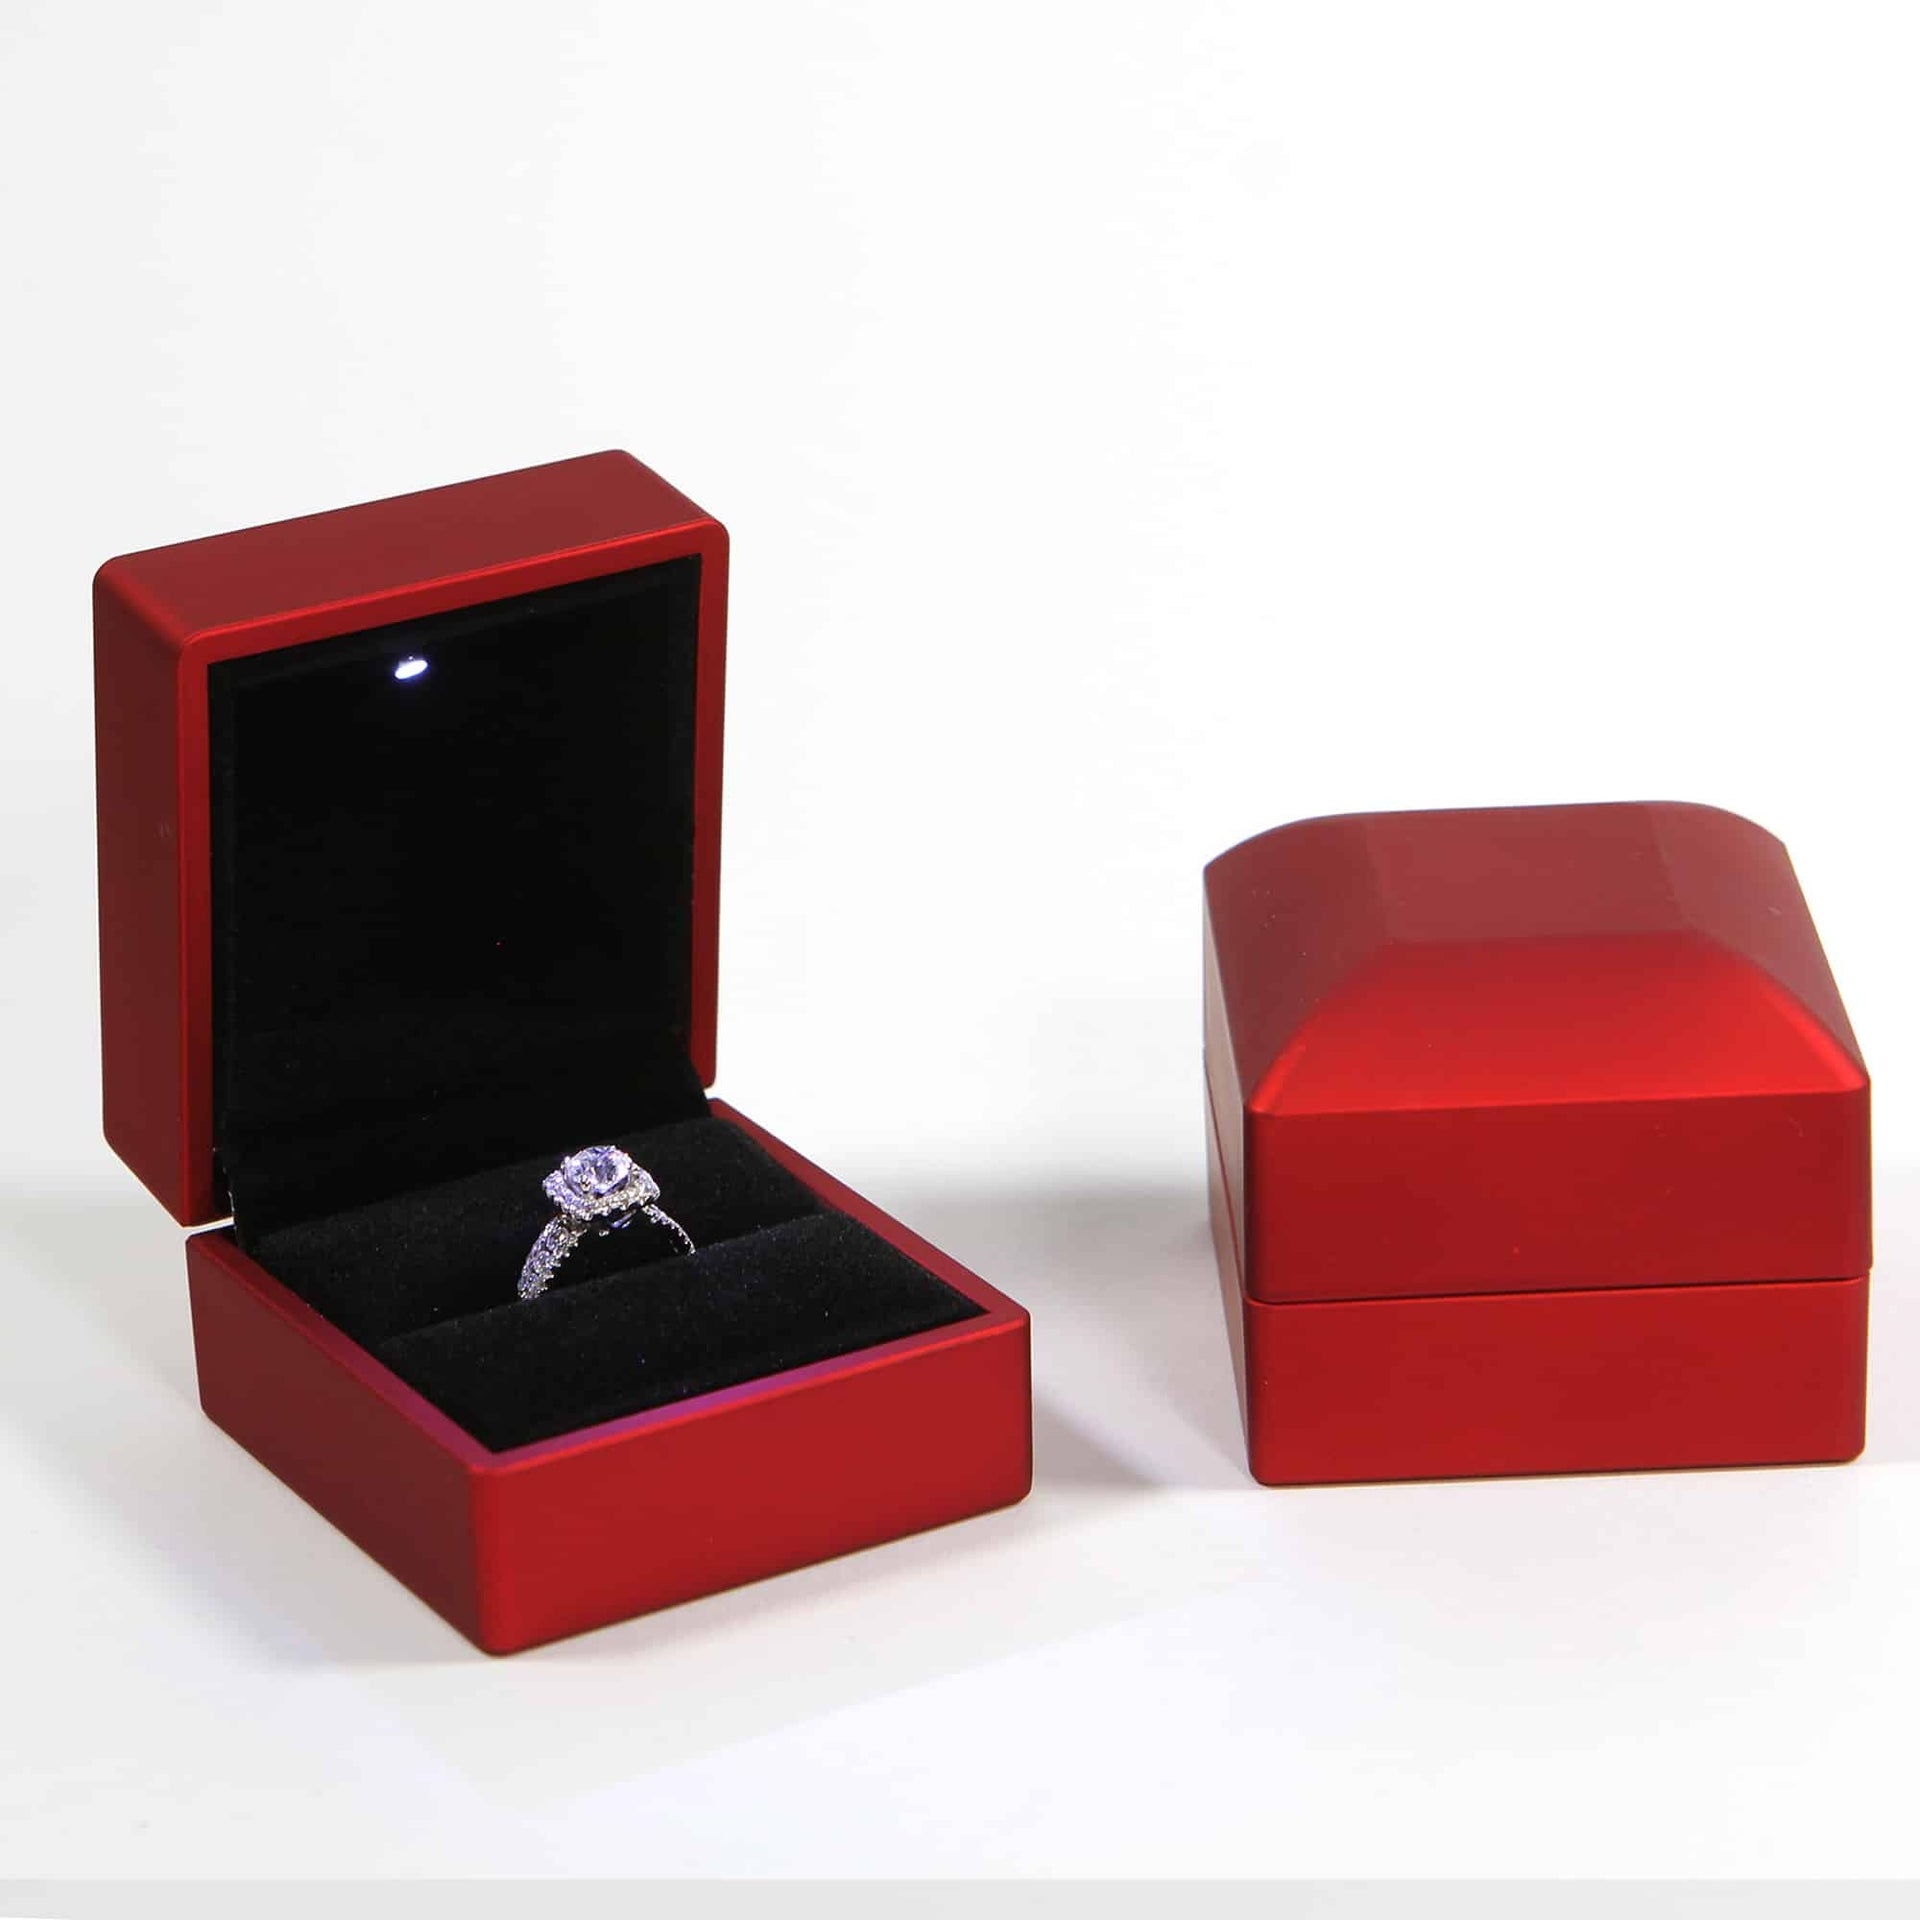 This is a red ring box that has a built in led light pointed down at the ring. Great for weddings, proposals, ,engagements or just to show off your gems!